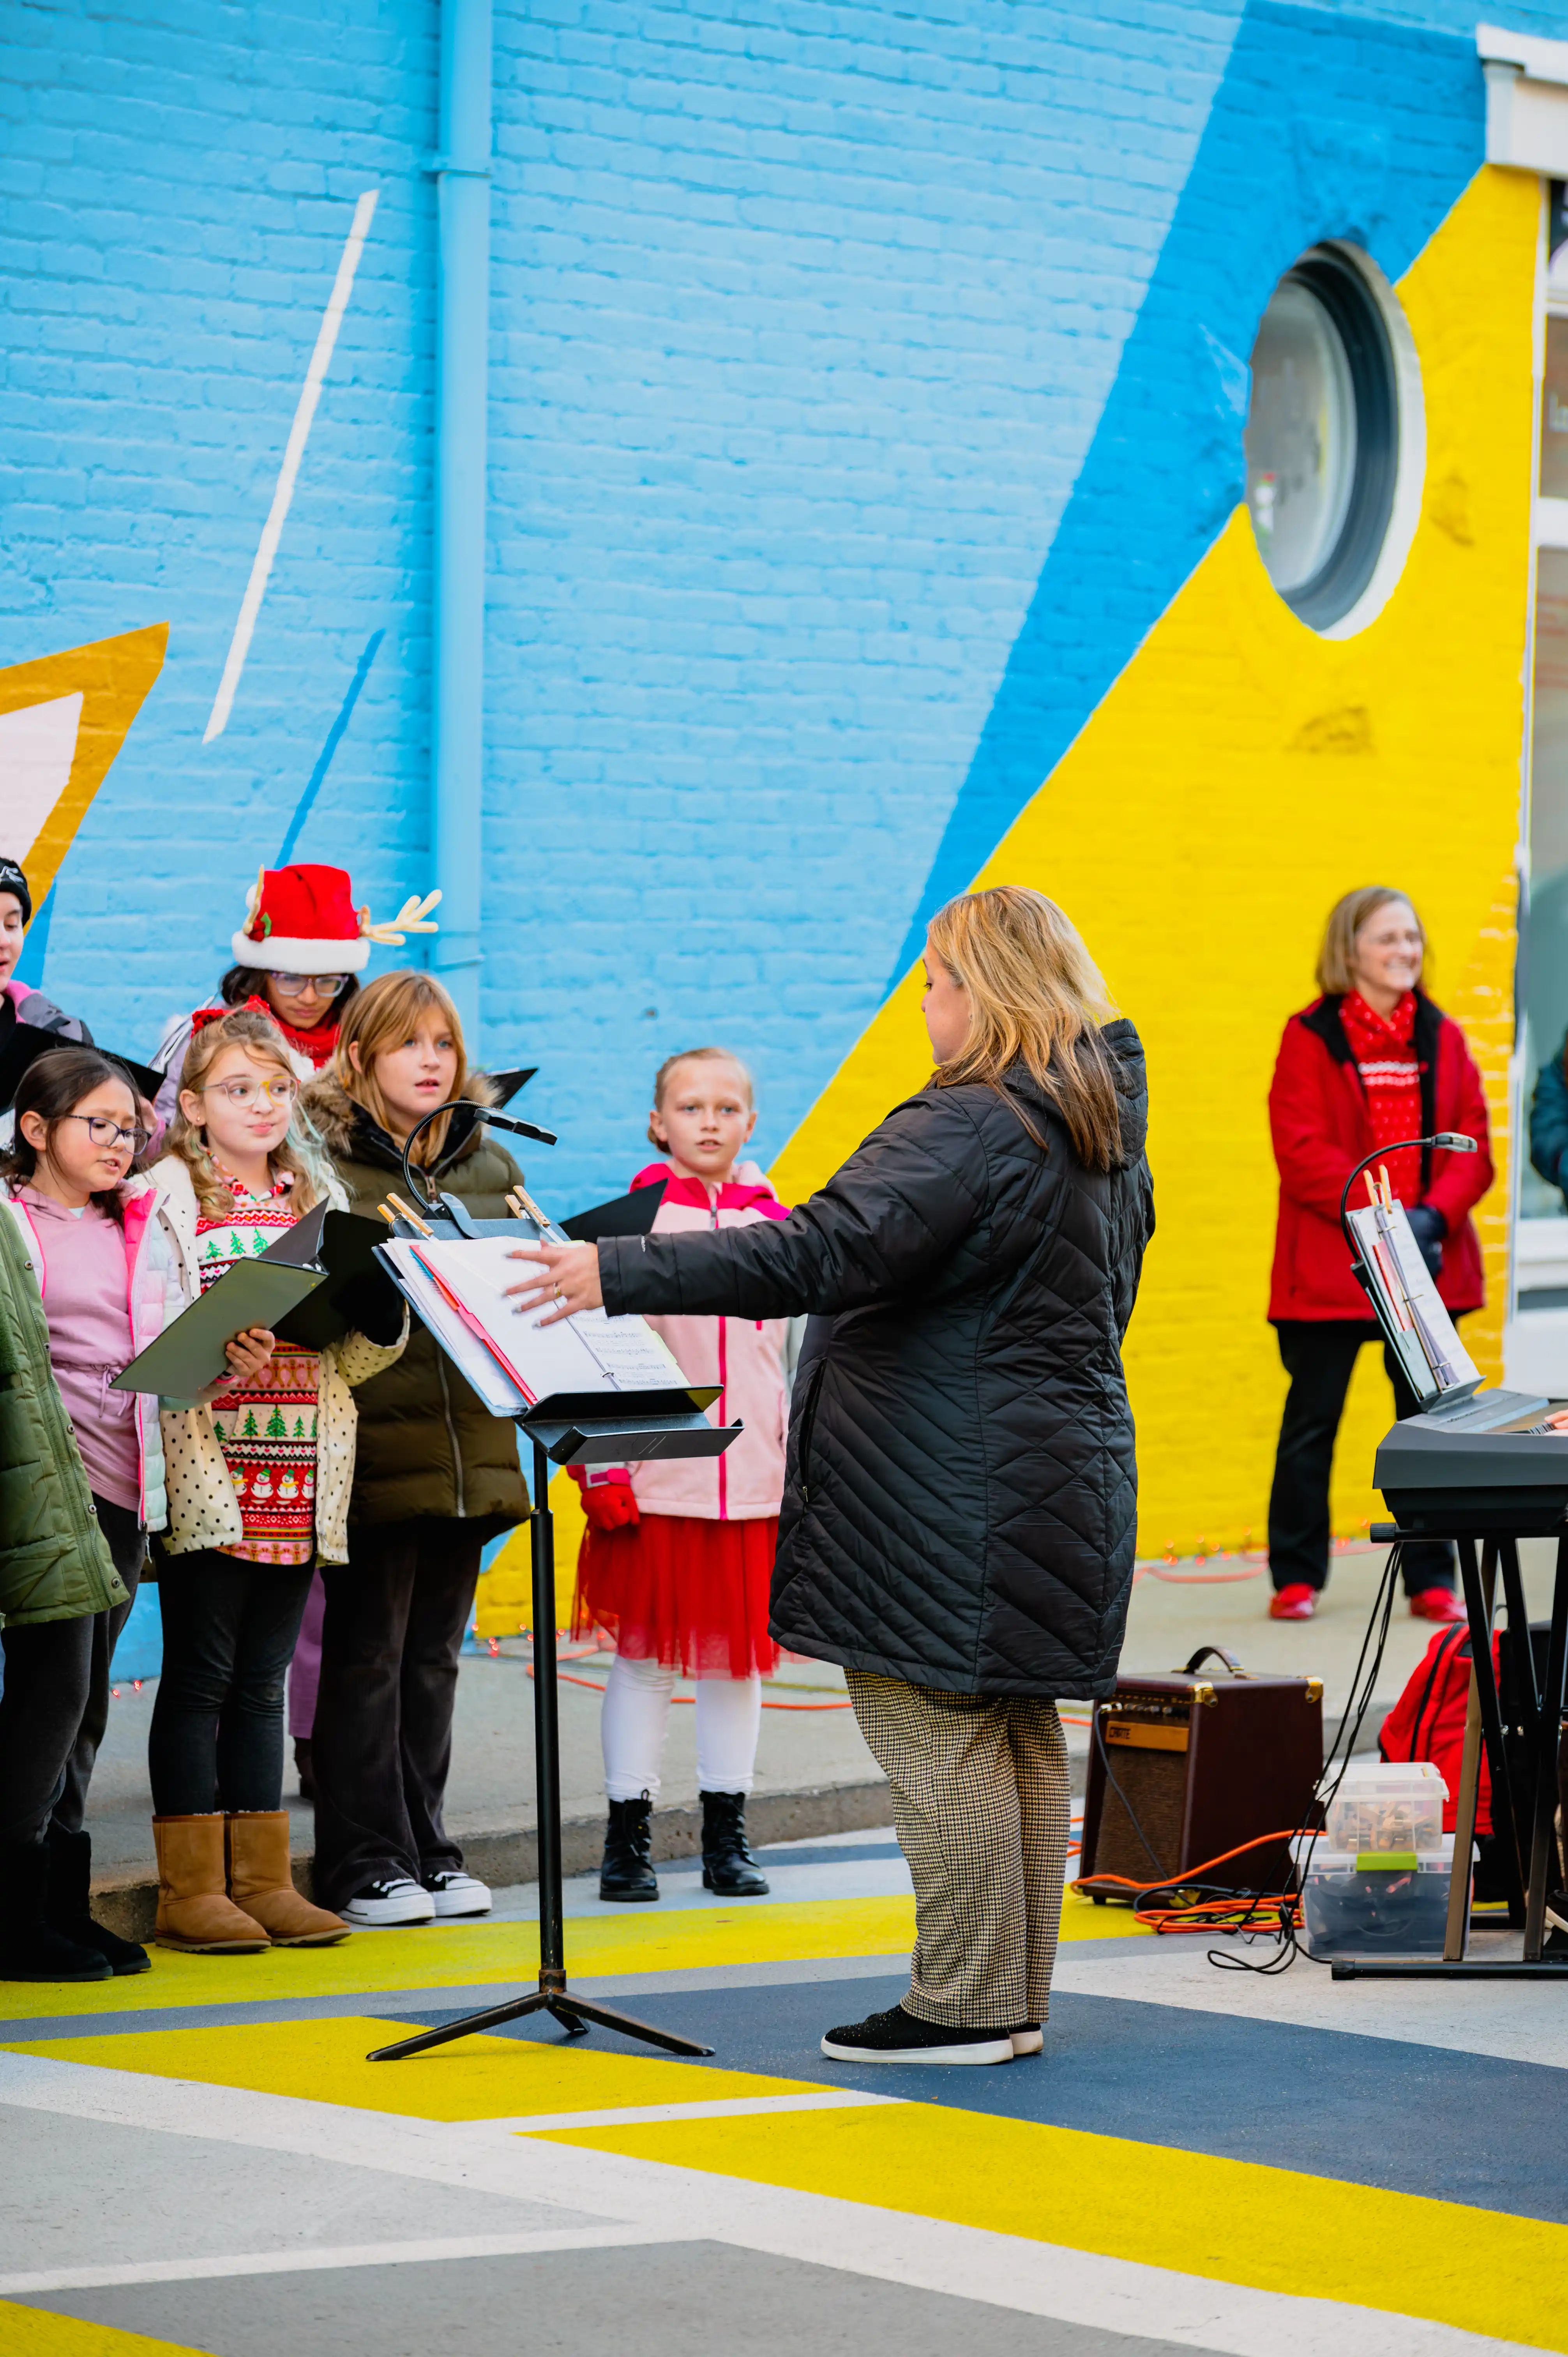 Children's choir performing on stage with a conductor and keyboard player in front of a vibrant colorful backdrop.